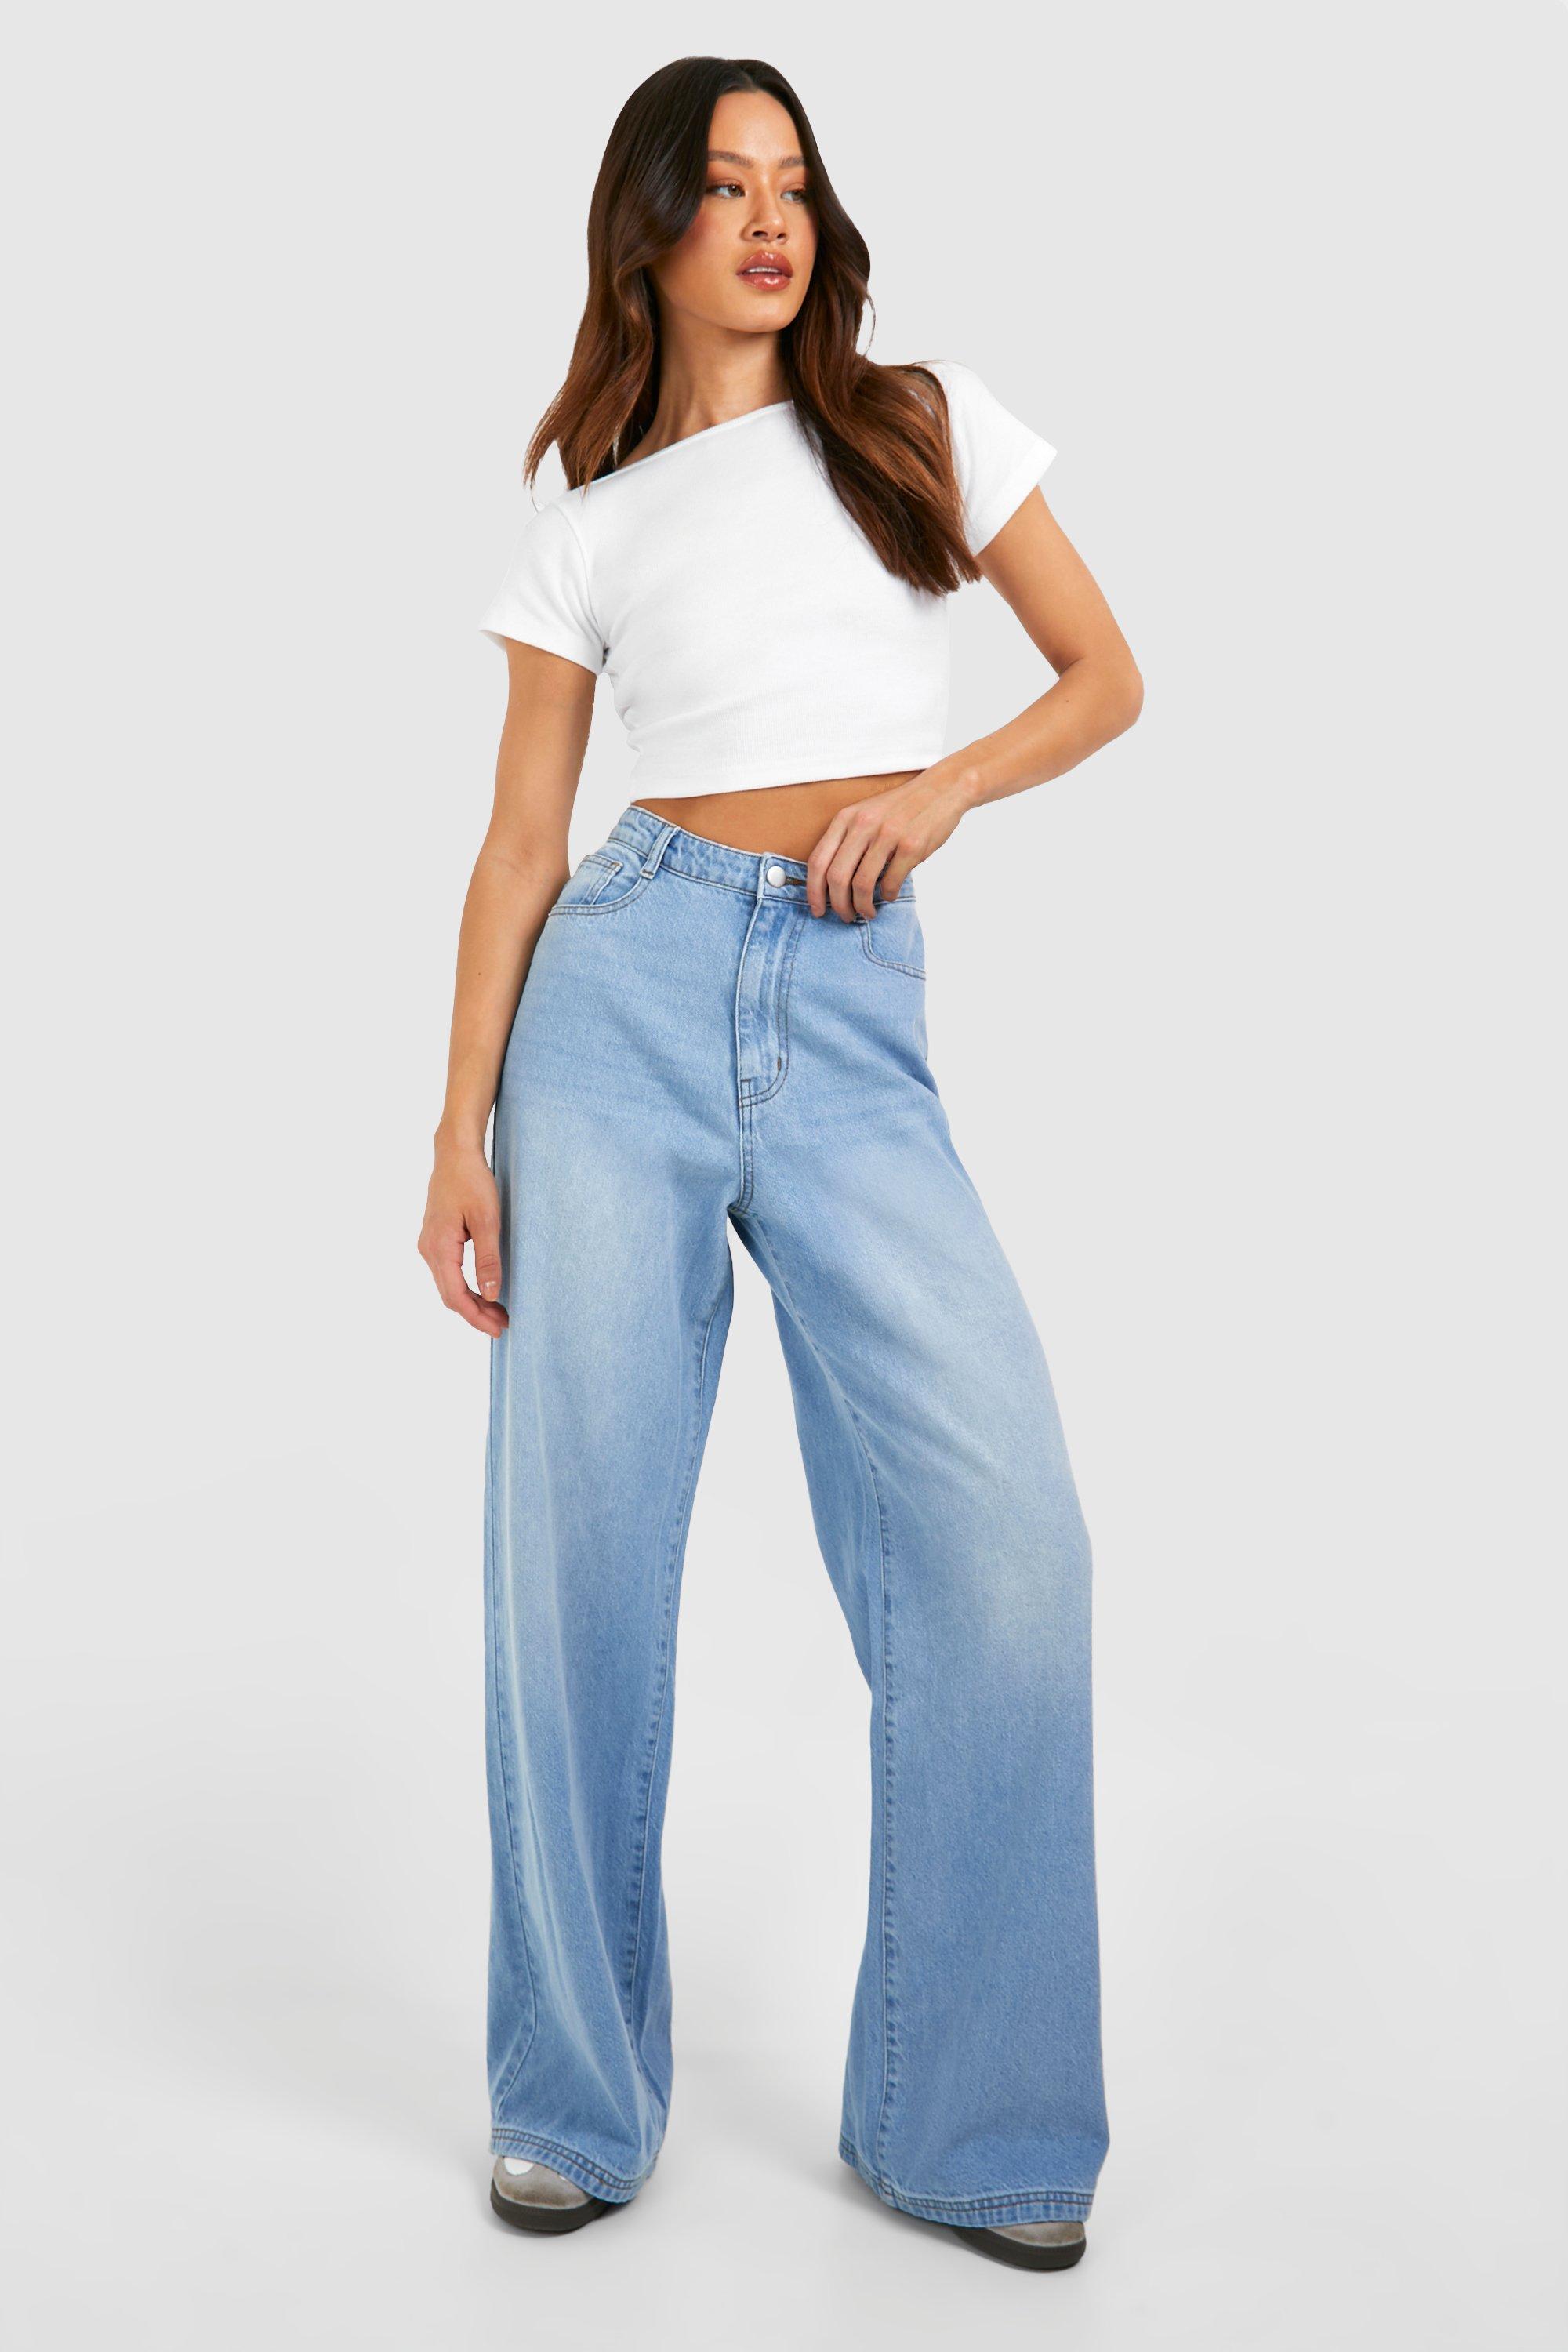 Boohoo Tall Blue Washed Wide Leg Jeans, Washed Blue